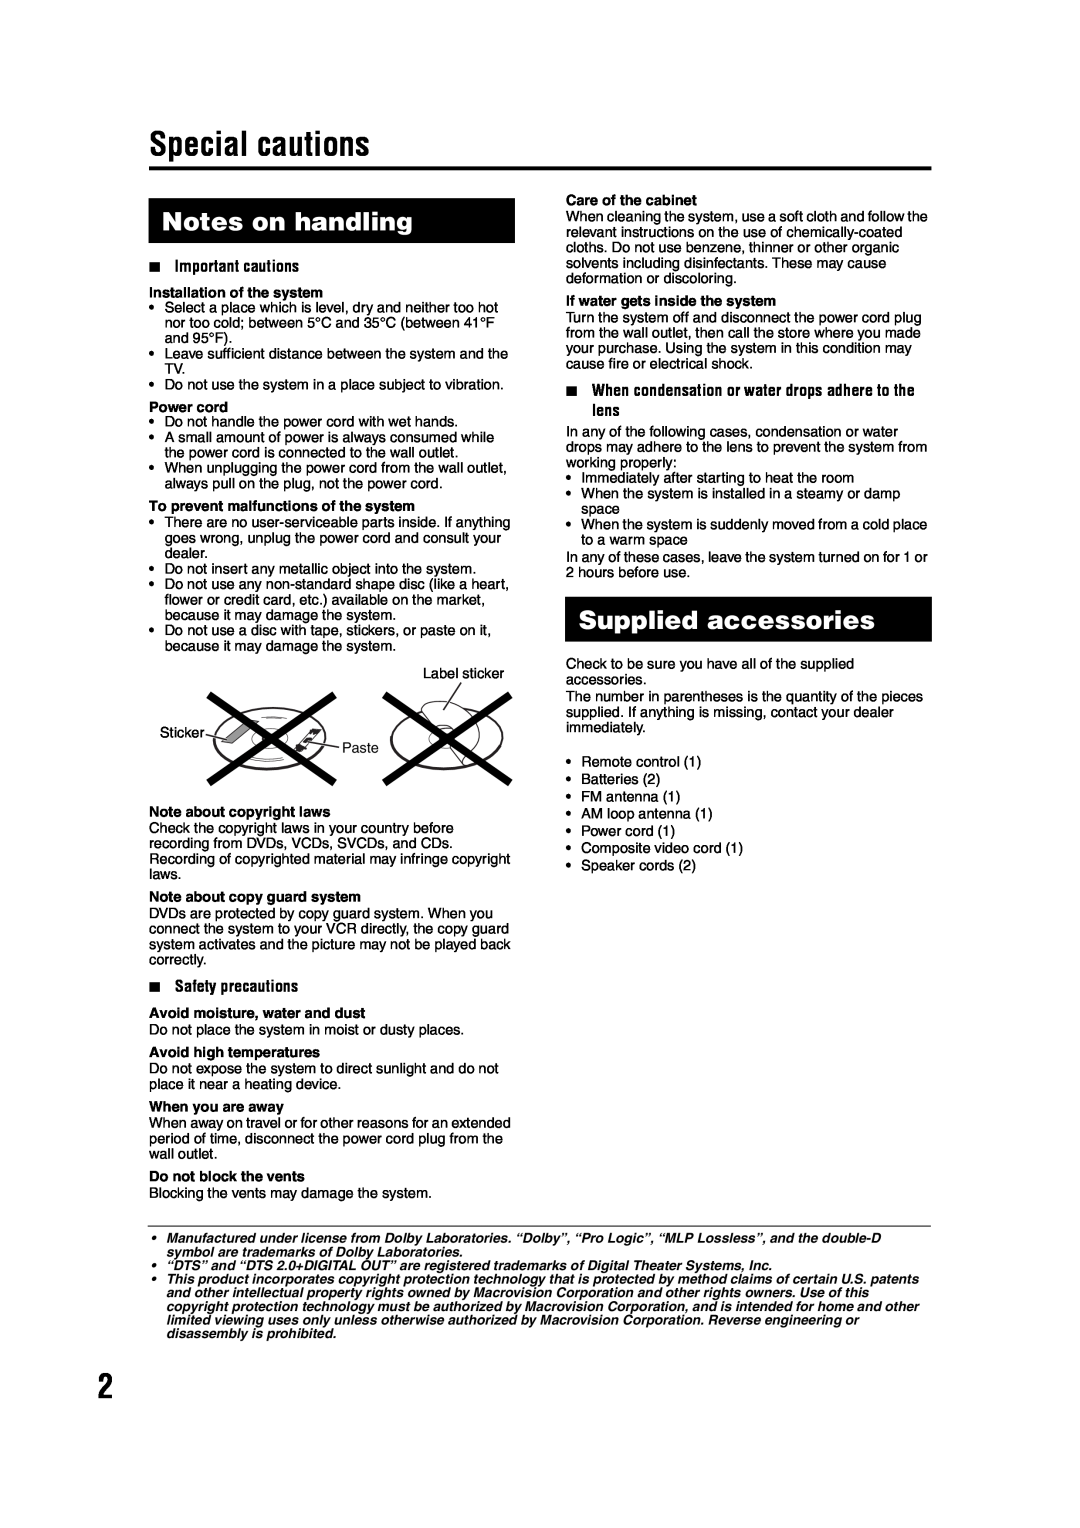 JVC GVT0142-001A manual Special cautions, Notes on handling, Supplied accessories, 7Important cautions, 7Safety precautions 